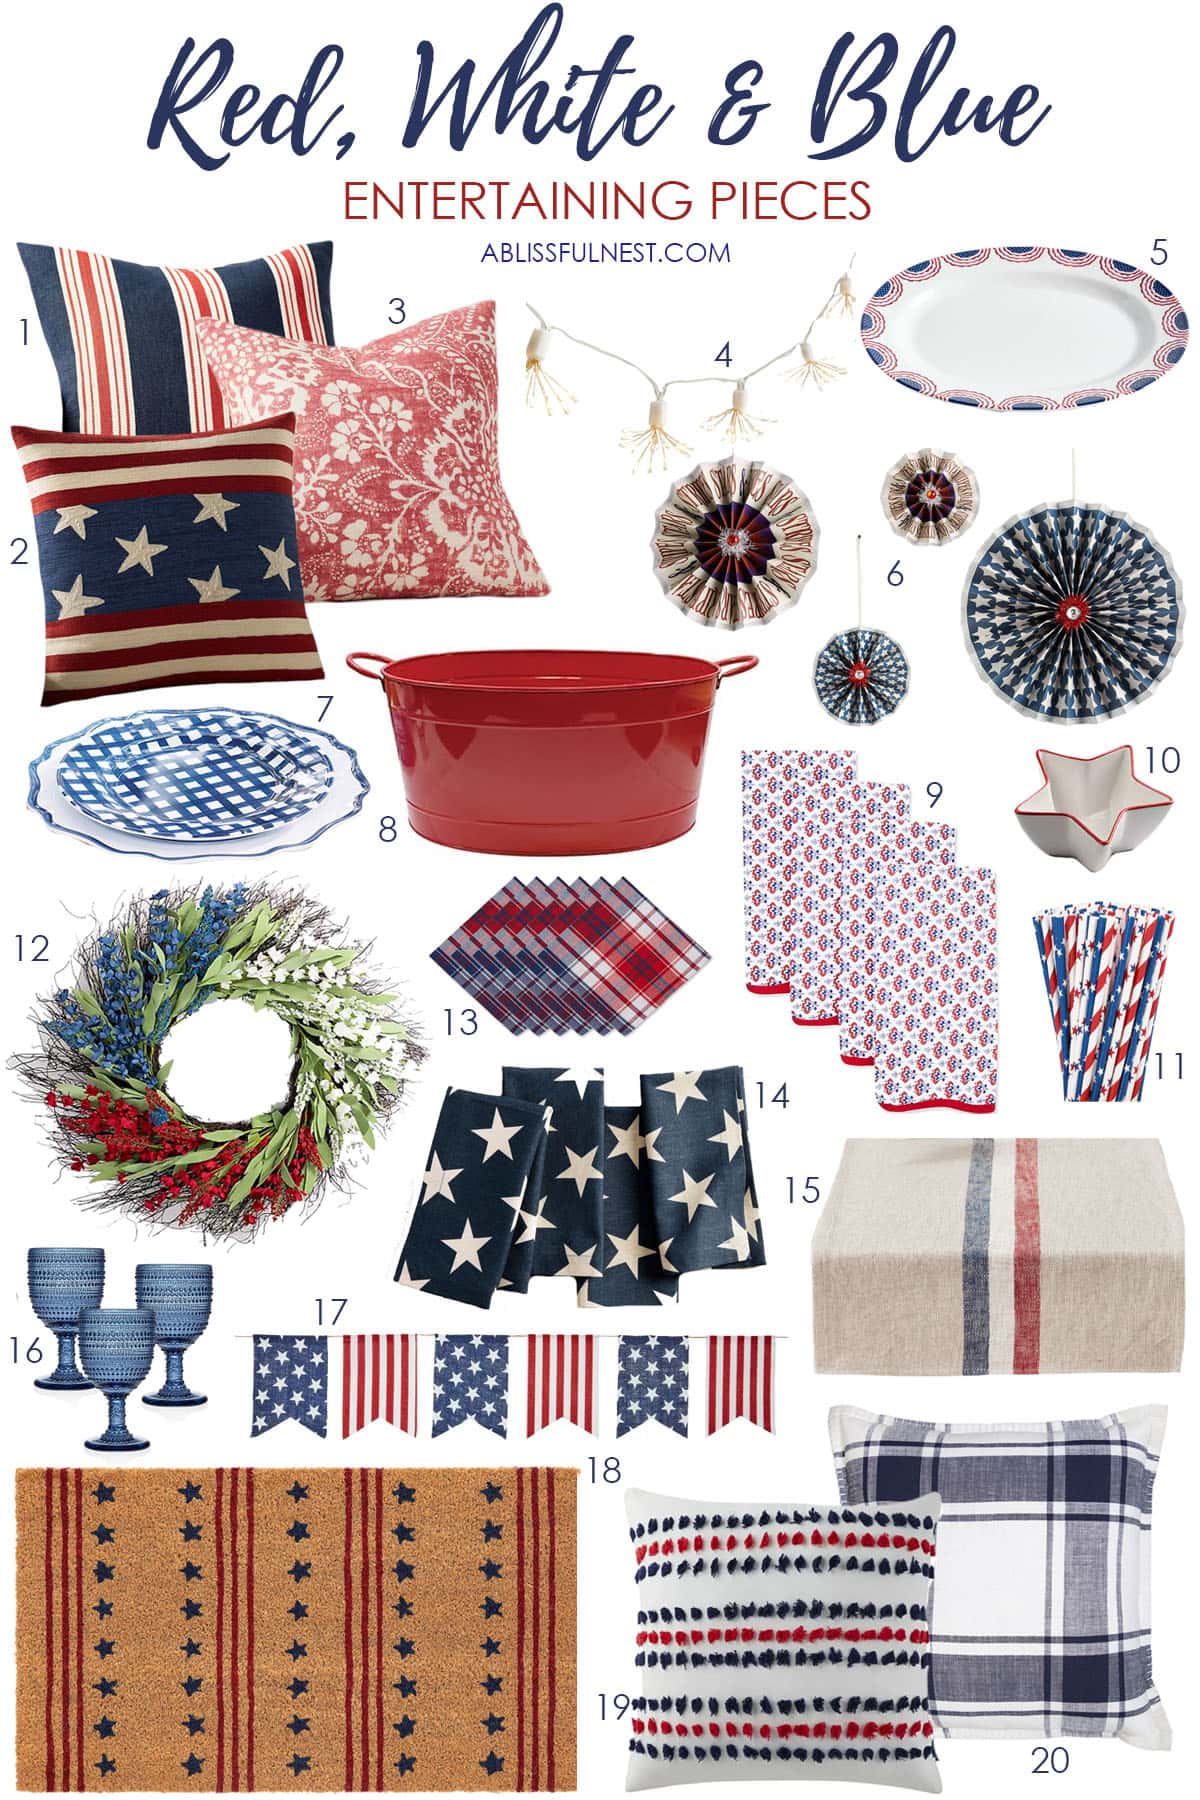 Red, White and Blue Entertaining Pieces